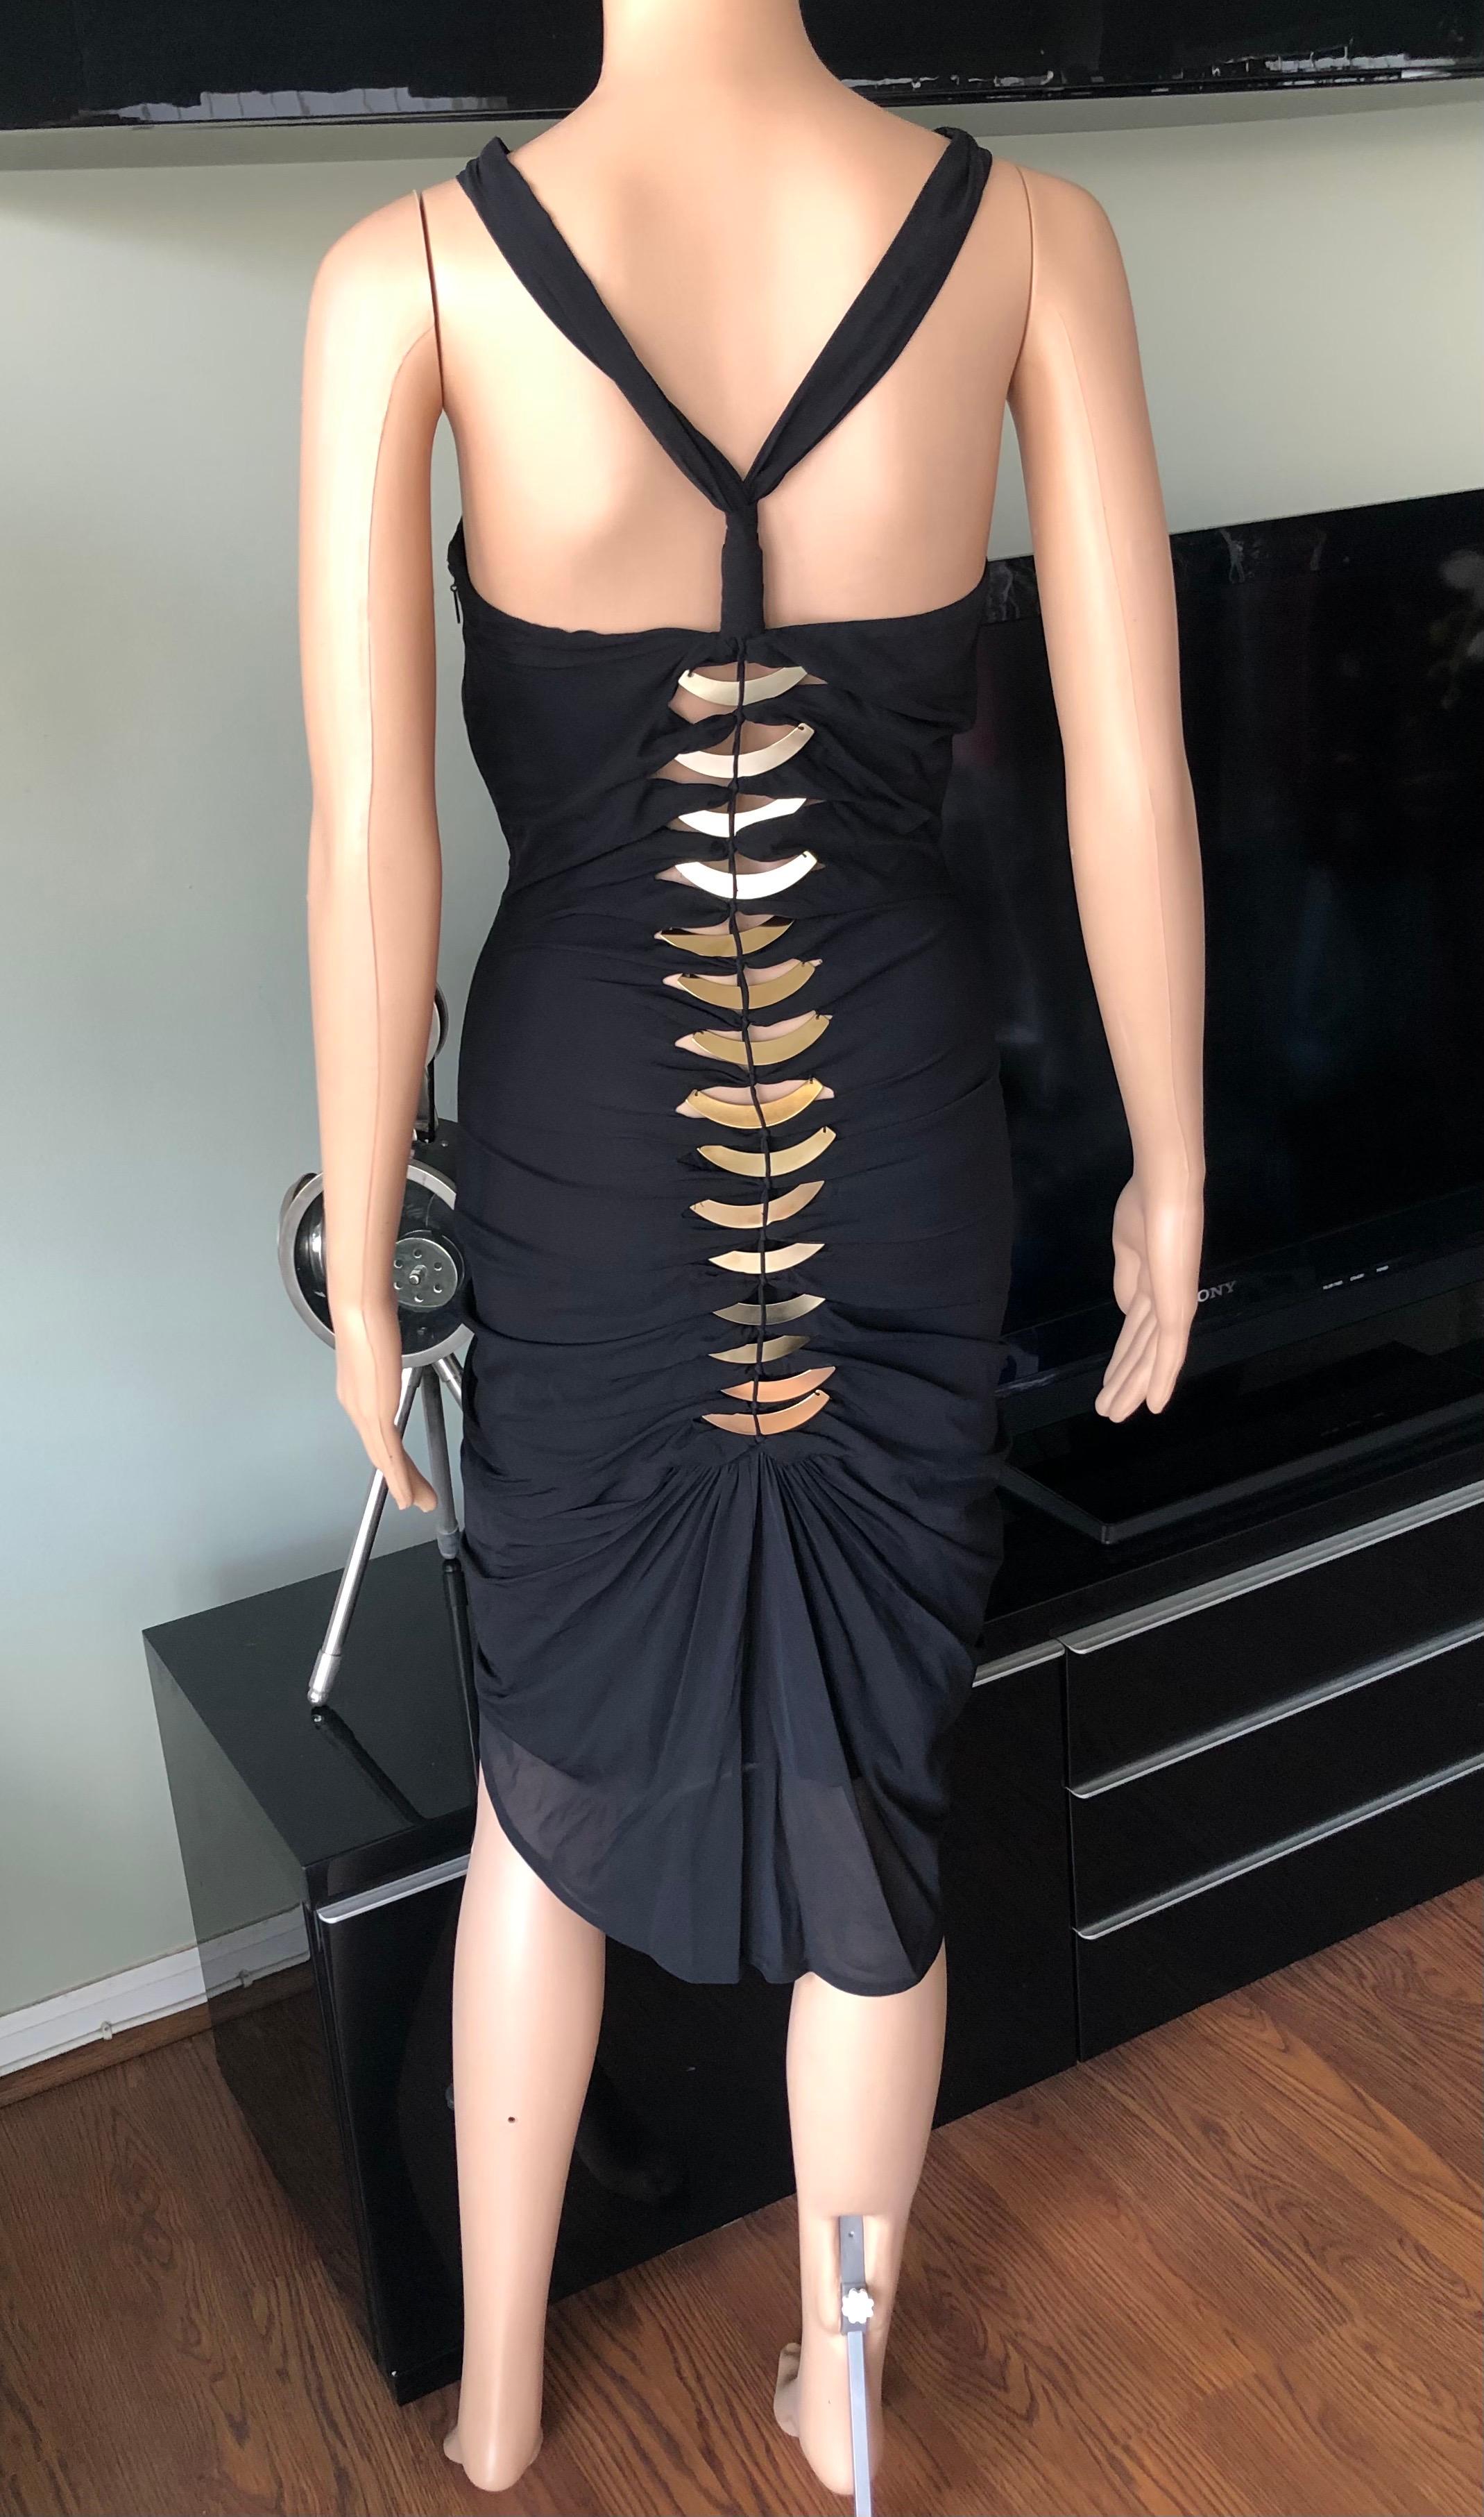 Tom Ford for Gucci c.2004 Embellished Cutout Back Black Mini Dress IT 40

Gucci by Tom Ford black stretchy dress featuring halter neckline, gold metal plates embellishments, cutout accents at back and concealed zip closure at side. 
